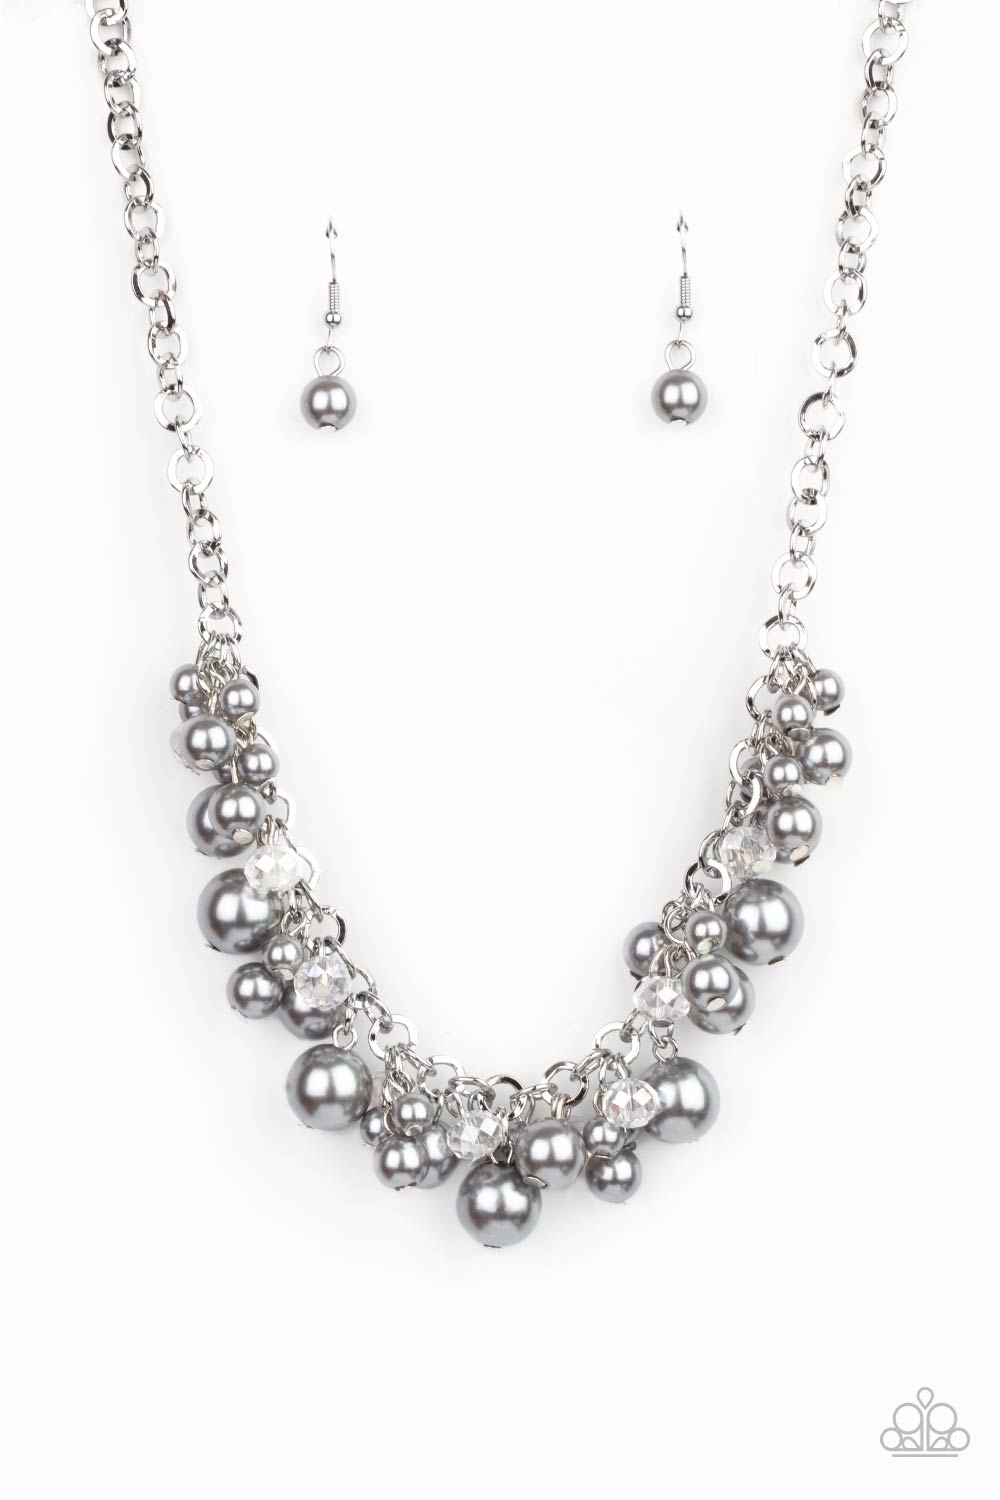 Paparazzi - Positively PEARL-escent - Silver Necklace